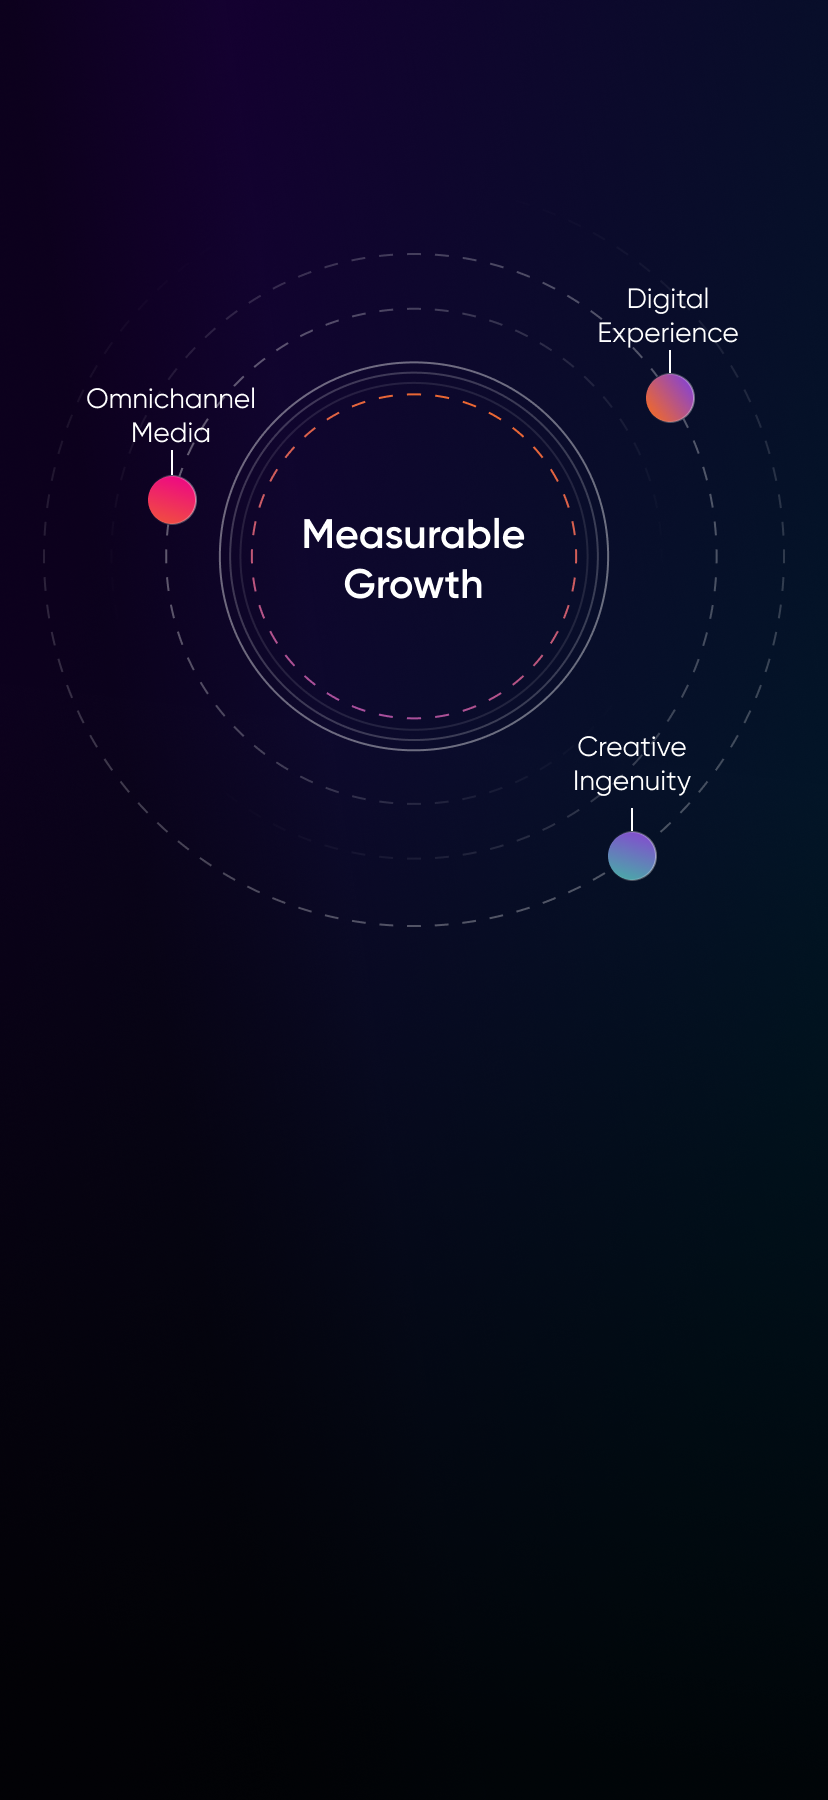 Measurable growth infographic